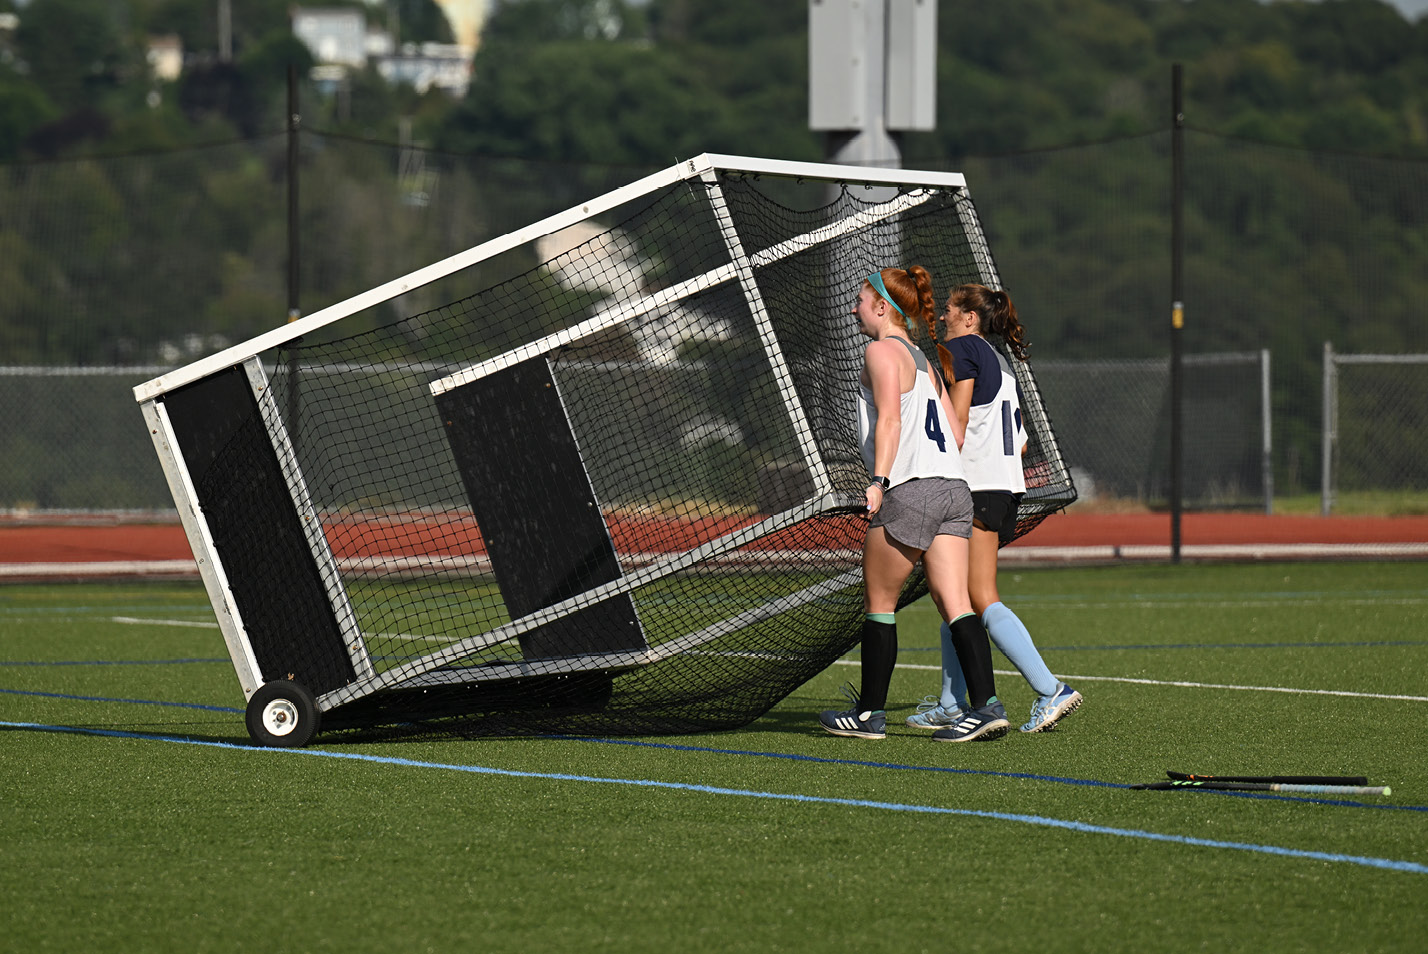 Field hockey players push a goal onto the field before practice.